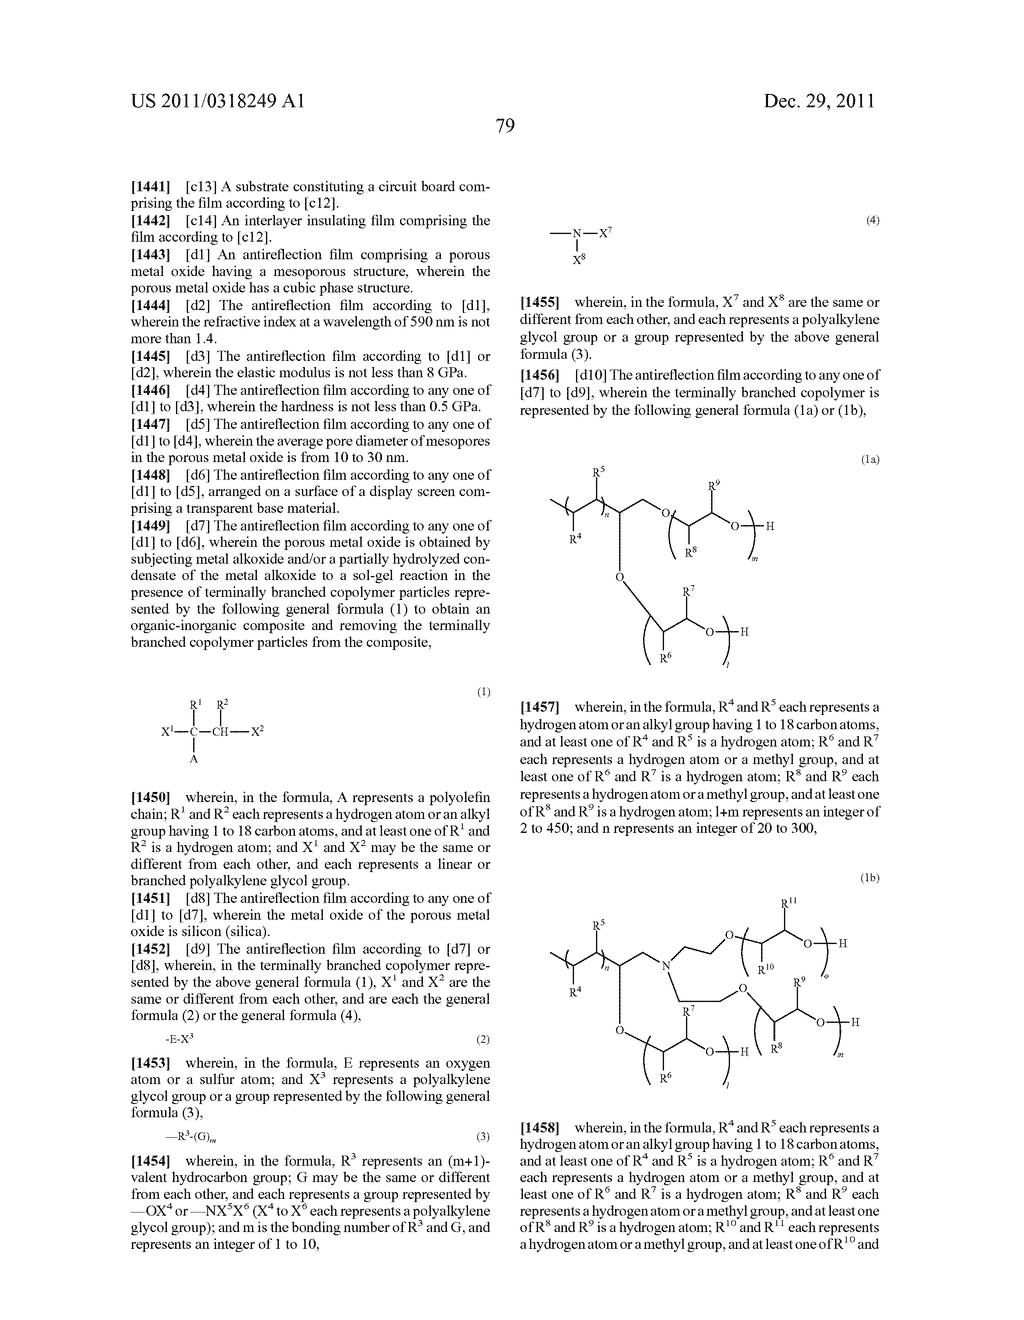 NOVEL POROUS METAL OXIDE, METHOD FOR PRODUCING THE SAME, AND USE OF THE     SAME - diagram, schematic, and image 115